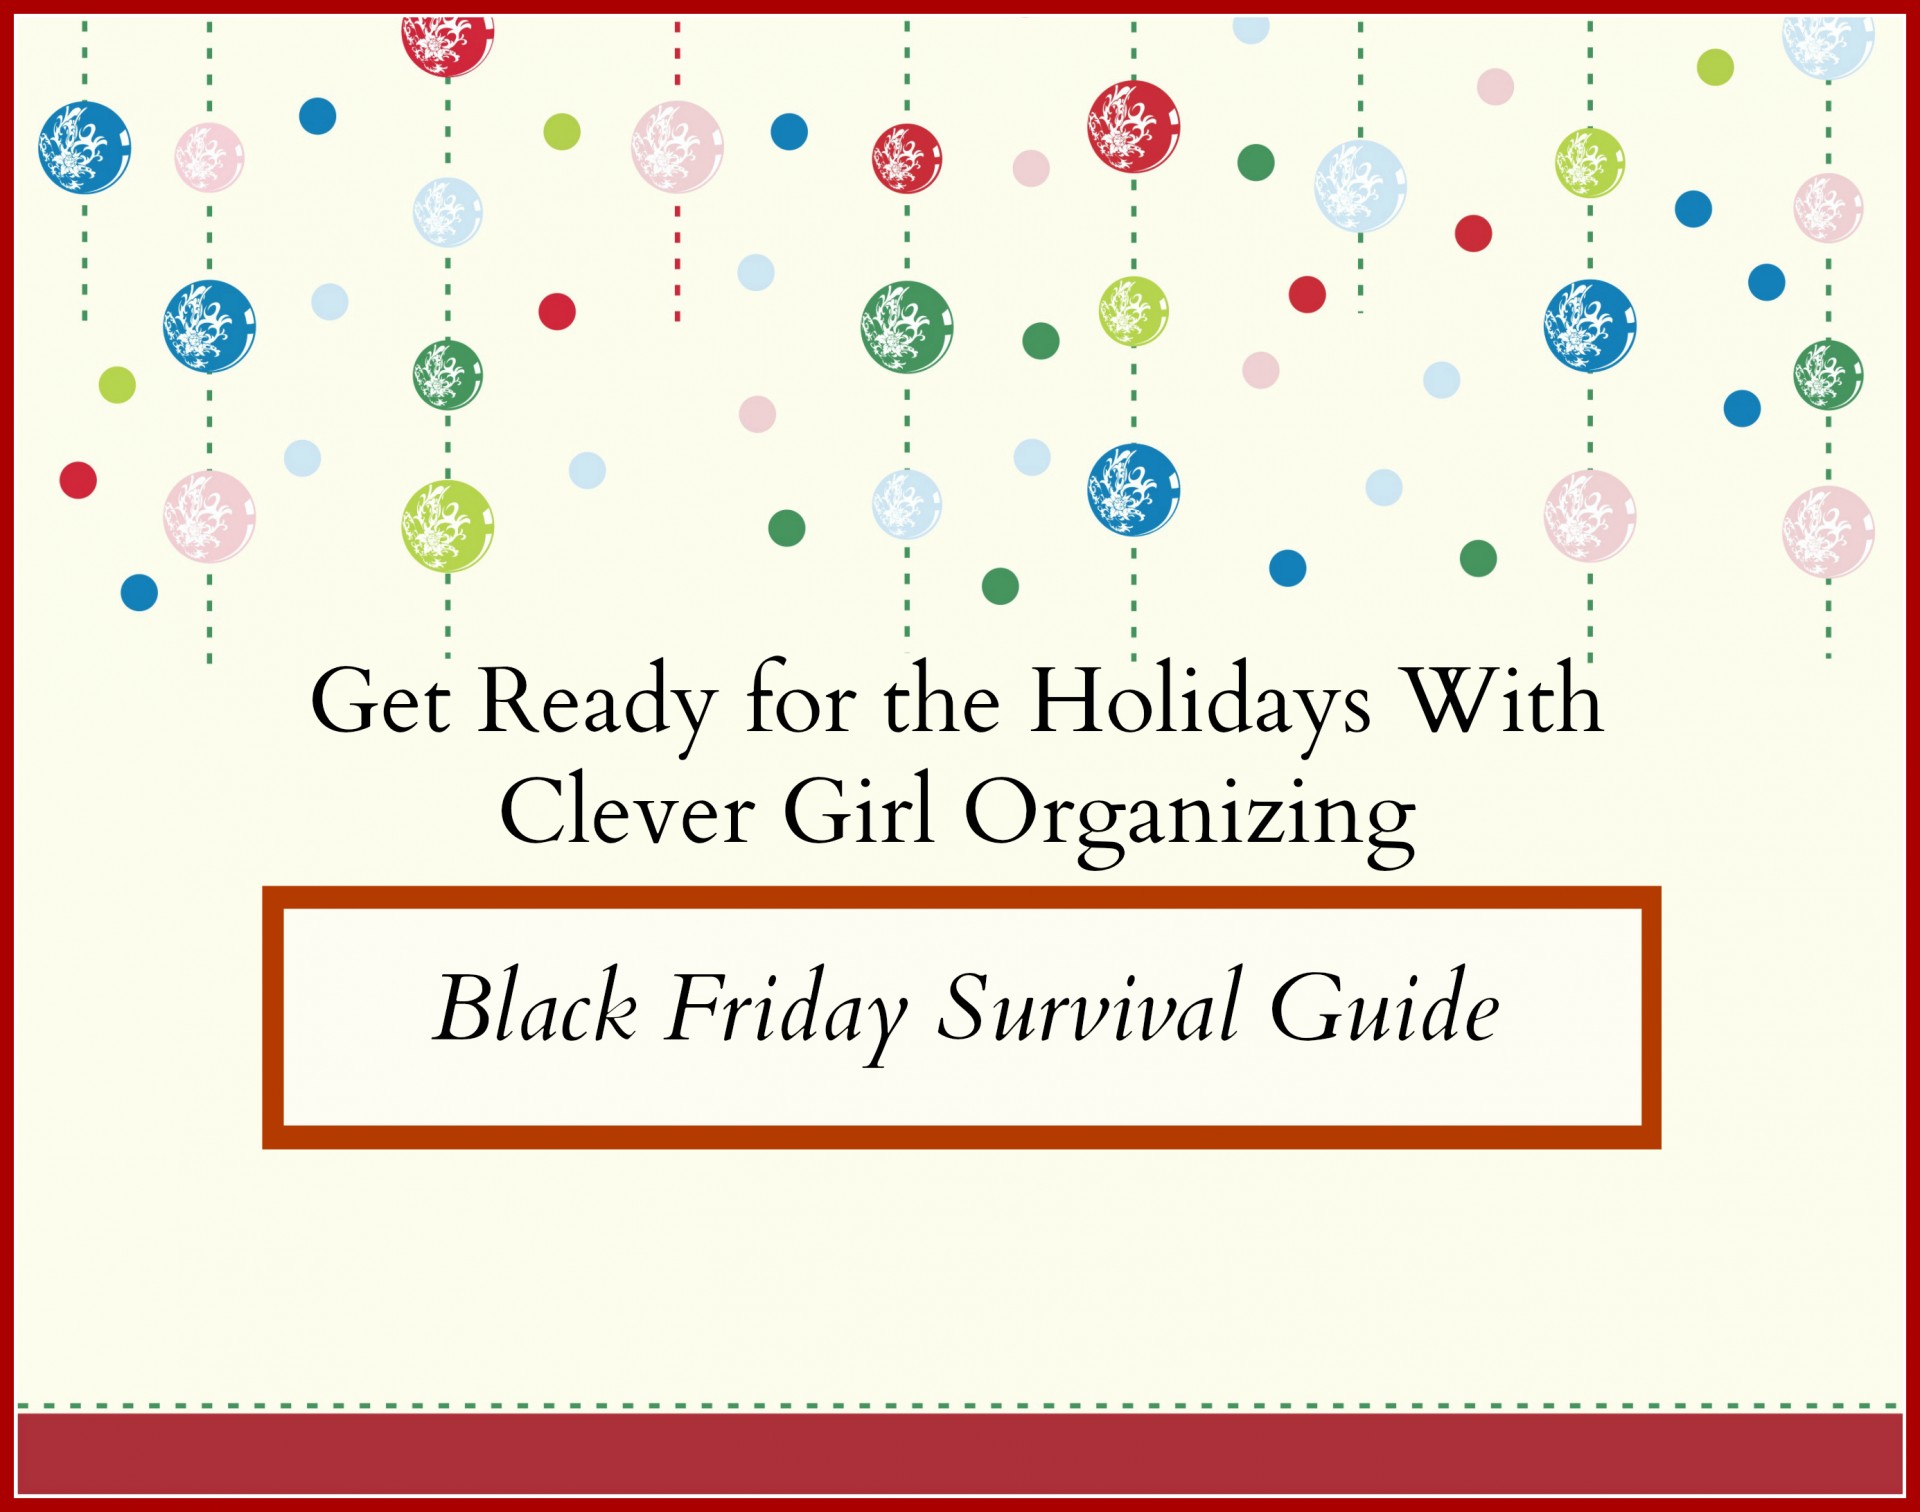 Get Ready for the Holidays: Black Friday Survival Guide